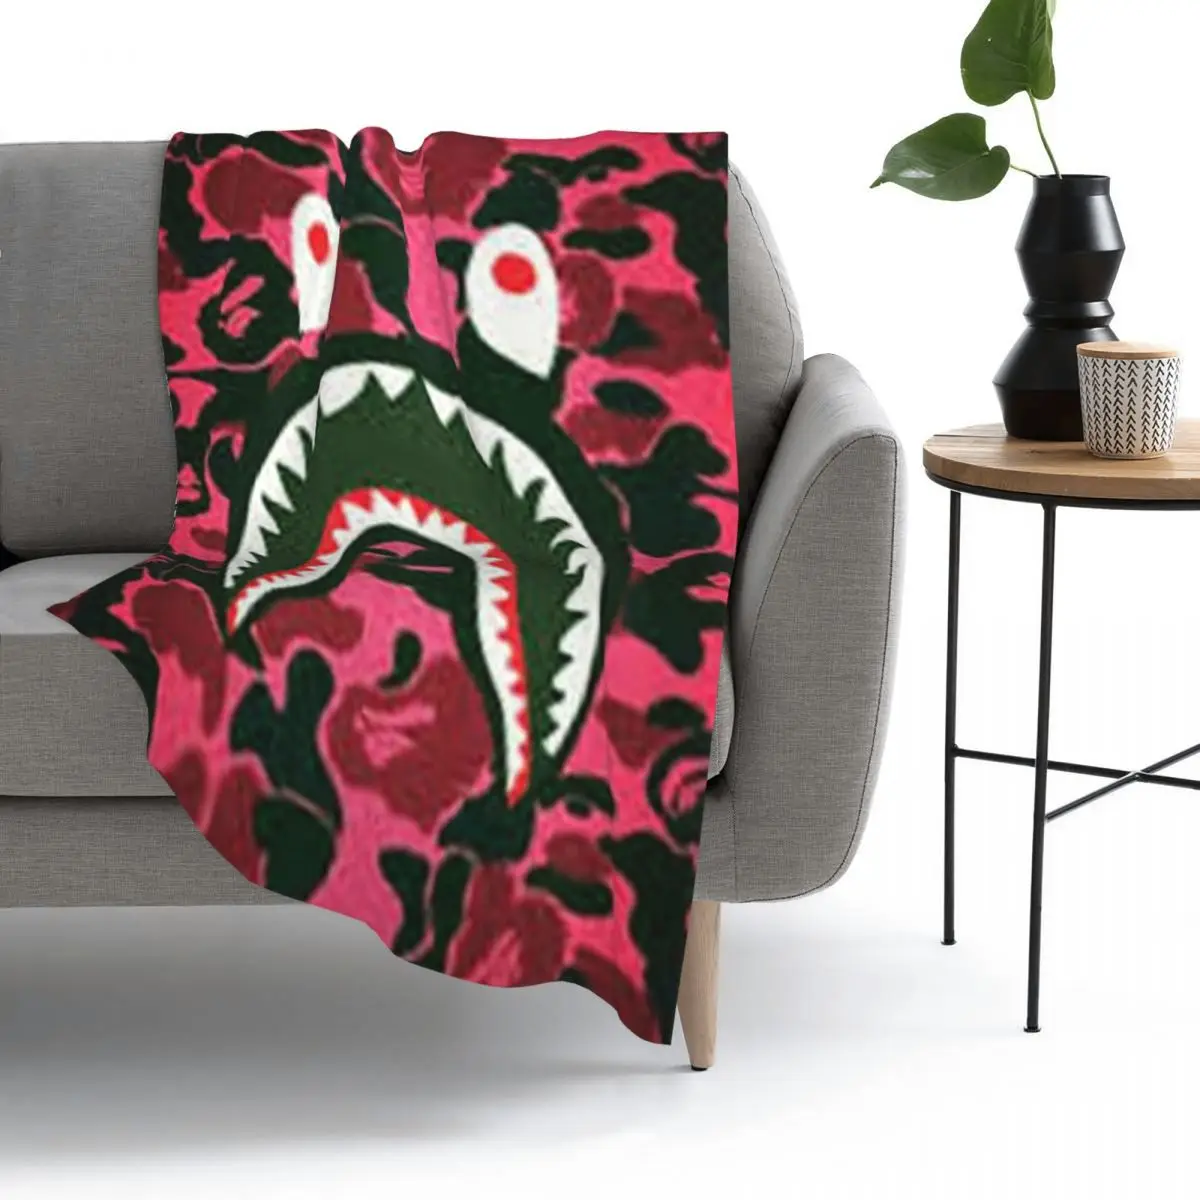 

Red Bape Camo Shark Blankets Flannel Portable Throw Blankets Sofa Throw Blanket for Home Bedroom Office Throws Bedspread Quilt